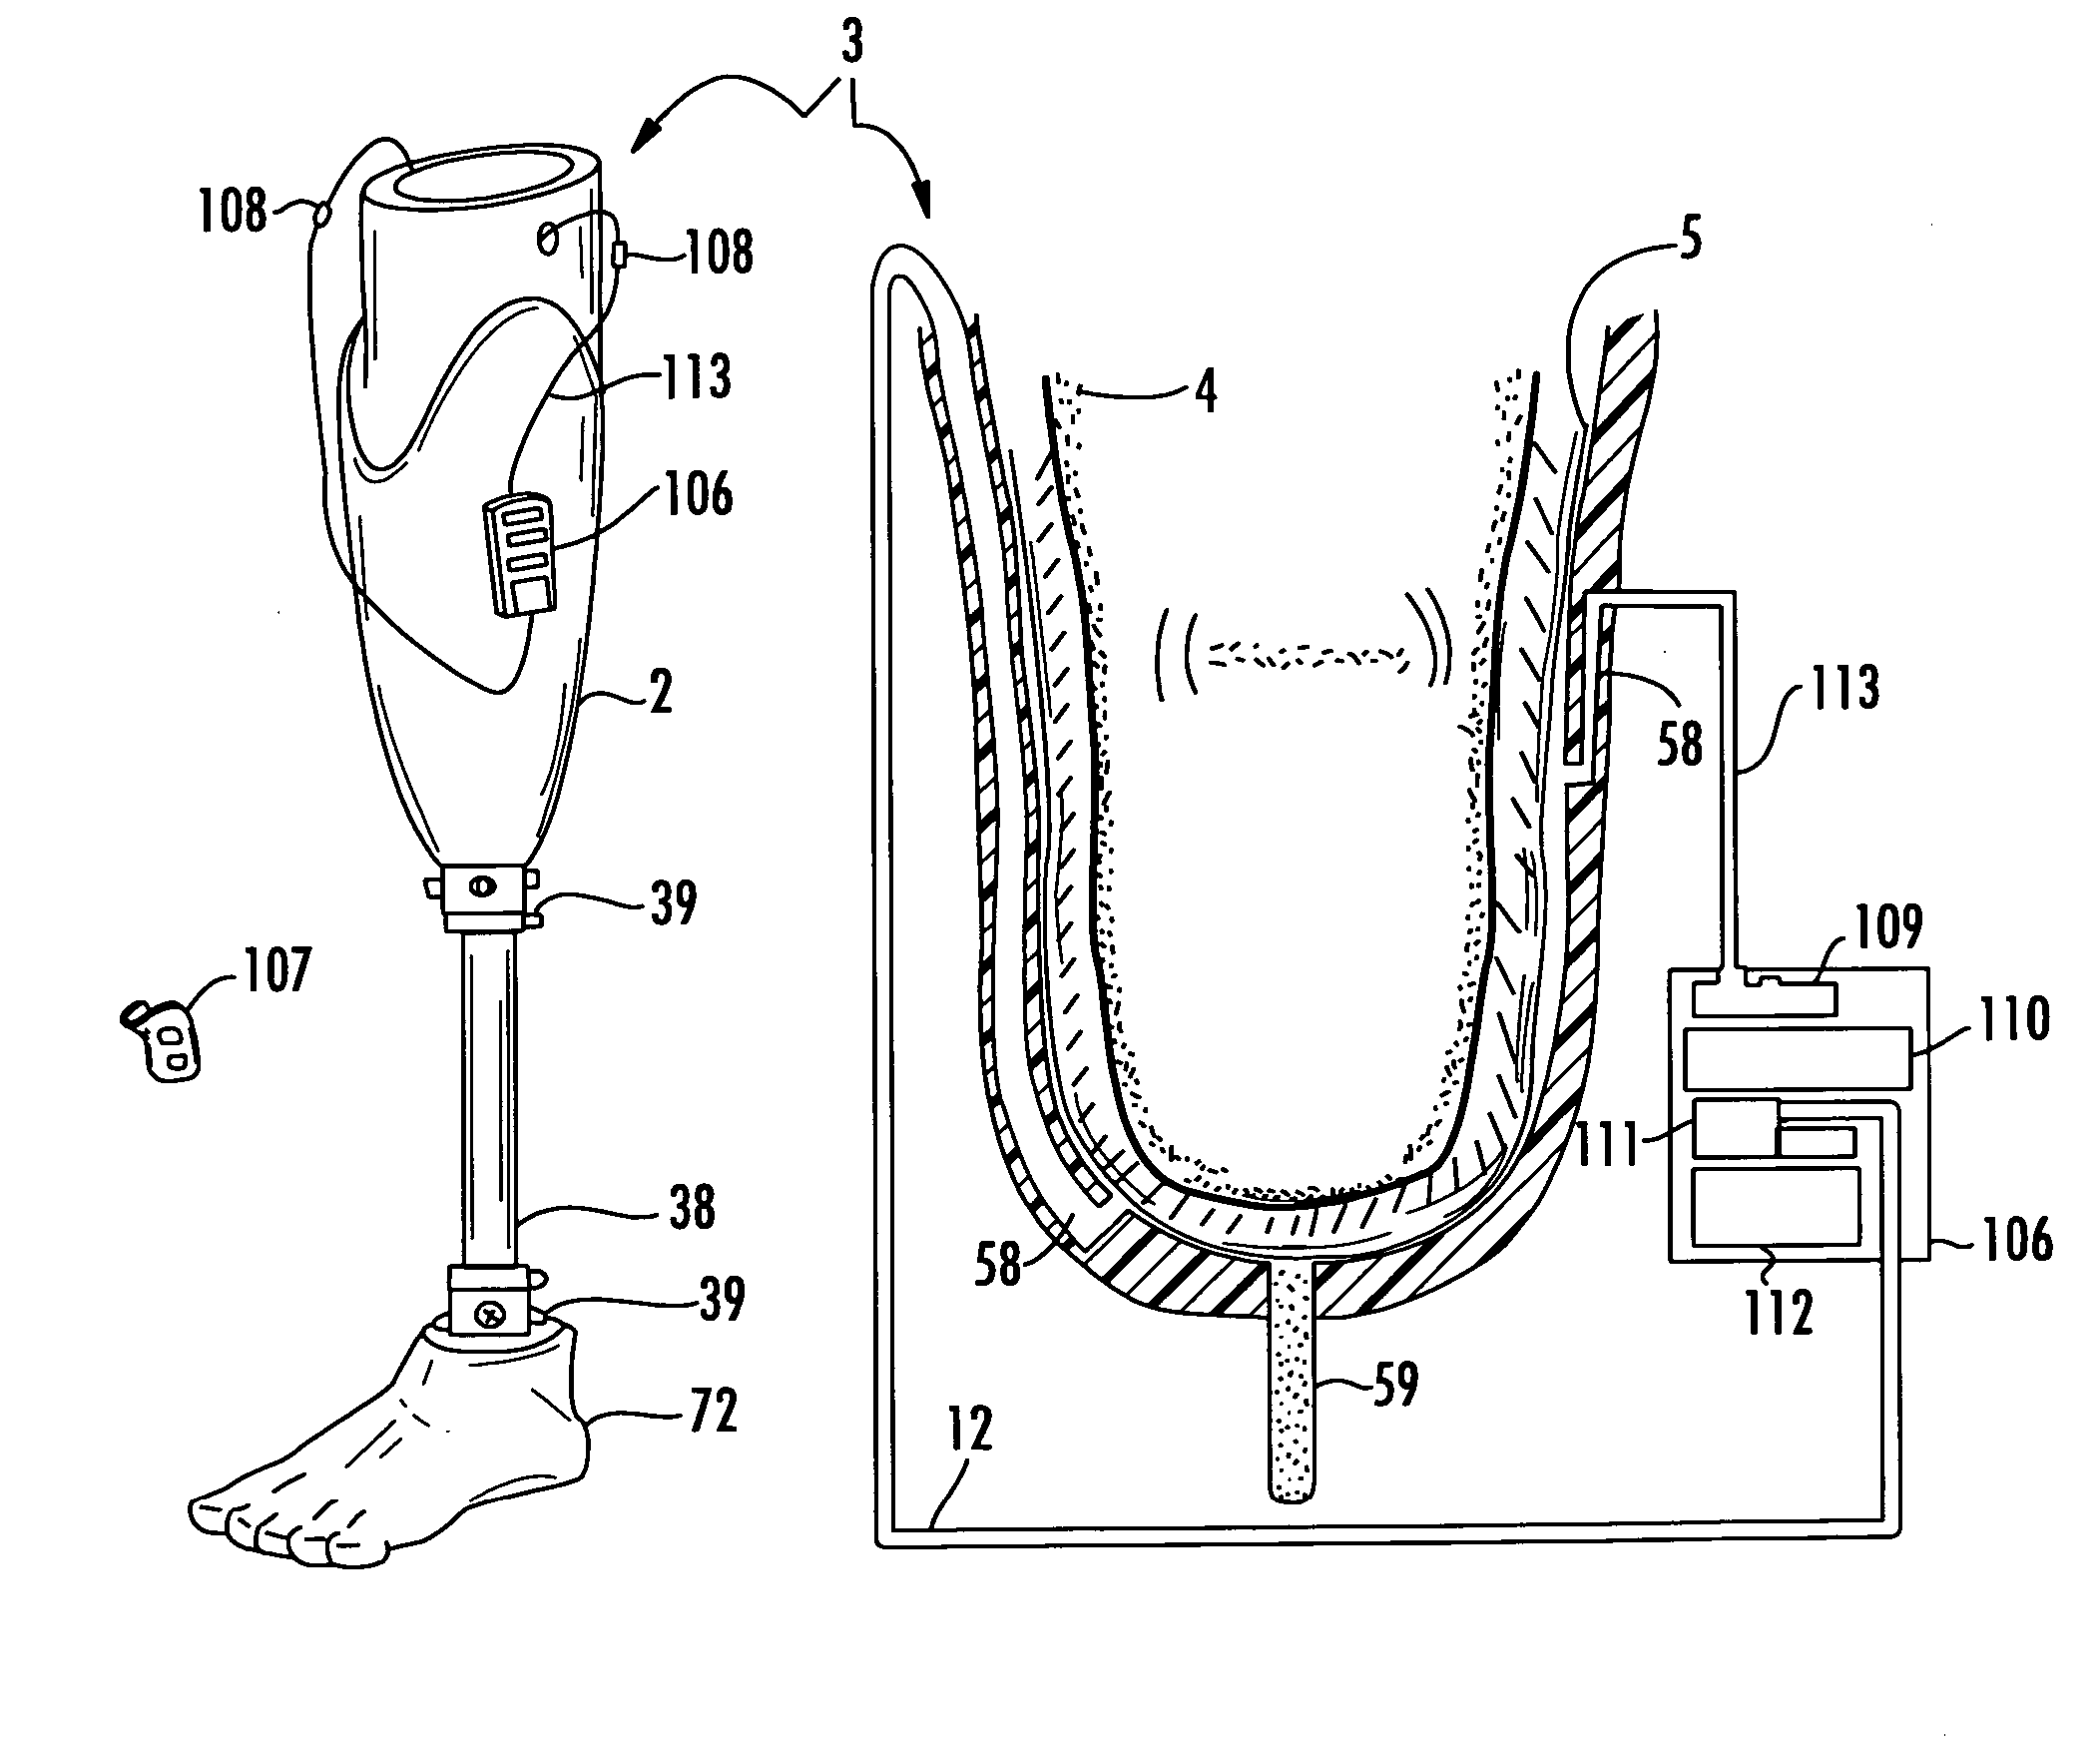 Vacuum assisted heat/perspiration removal system and limb volume management for prosthetic device